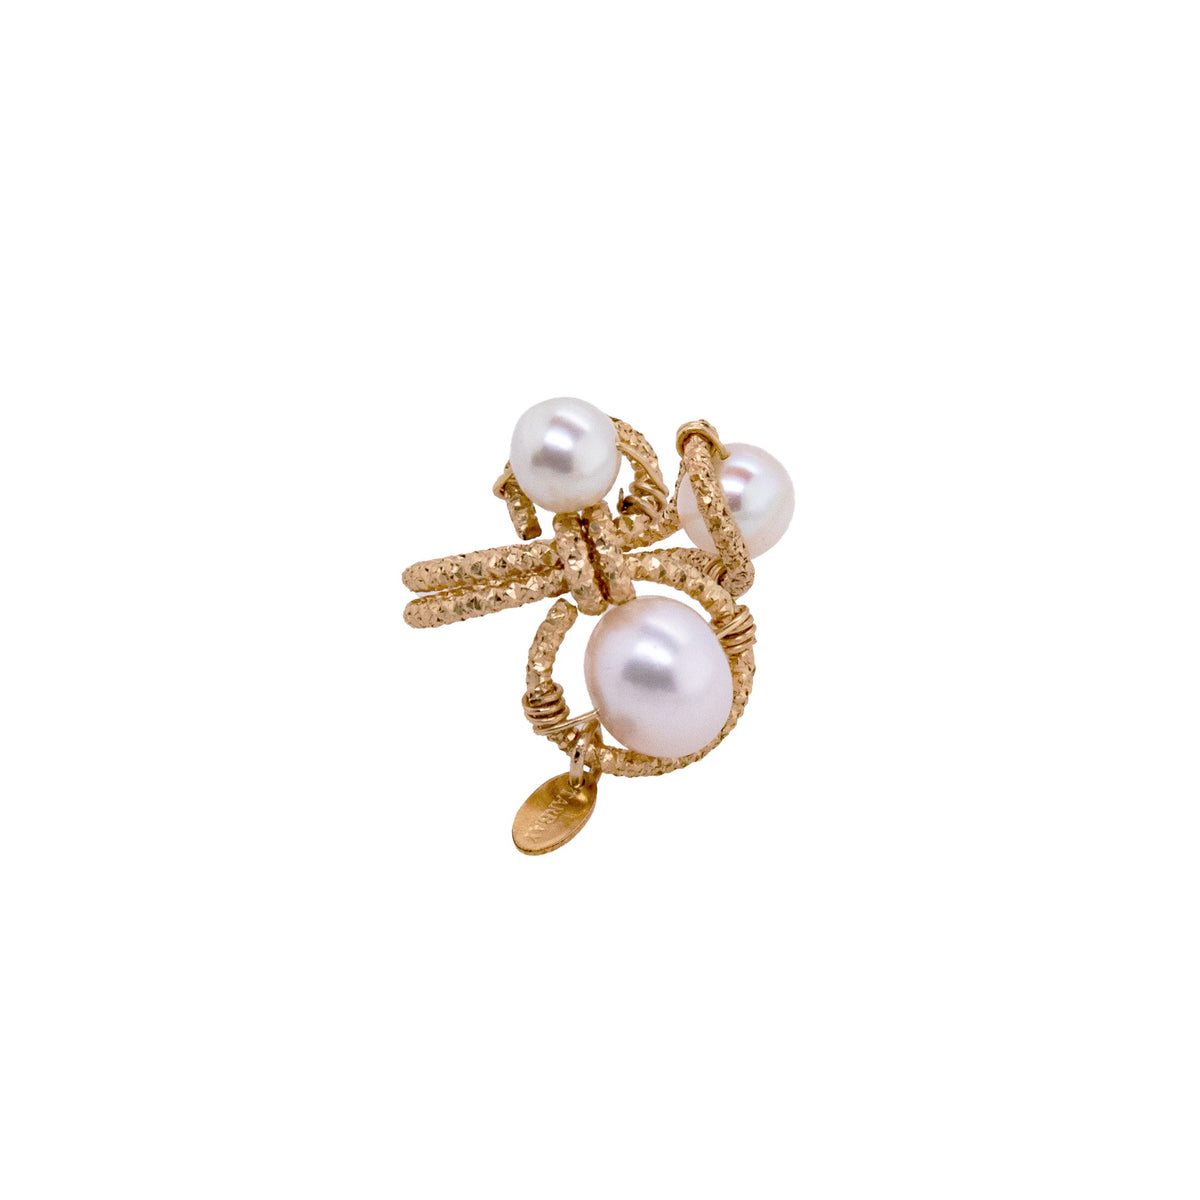 https://www.tarbay.shop/wp-content/uploads/1700/51/our-clearance-offers-a-great-option-to-save-money-while-also-get-lilli-adjustable-ring-pearl-tarbay-outlet-sale_3.jpg